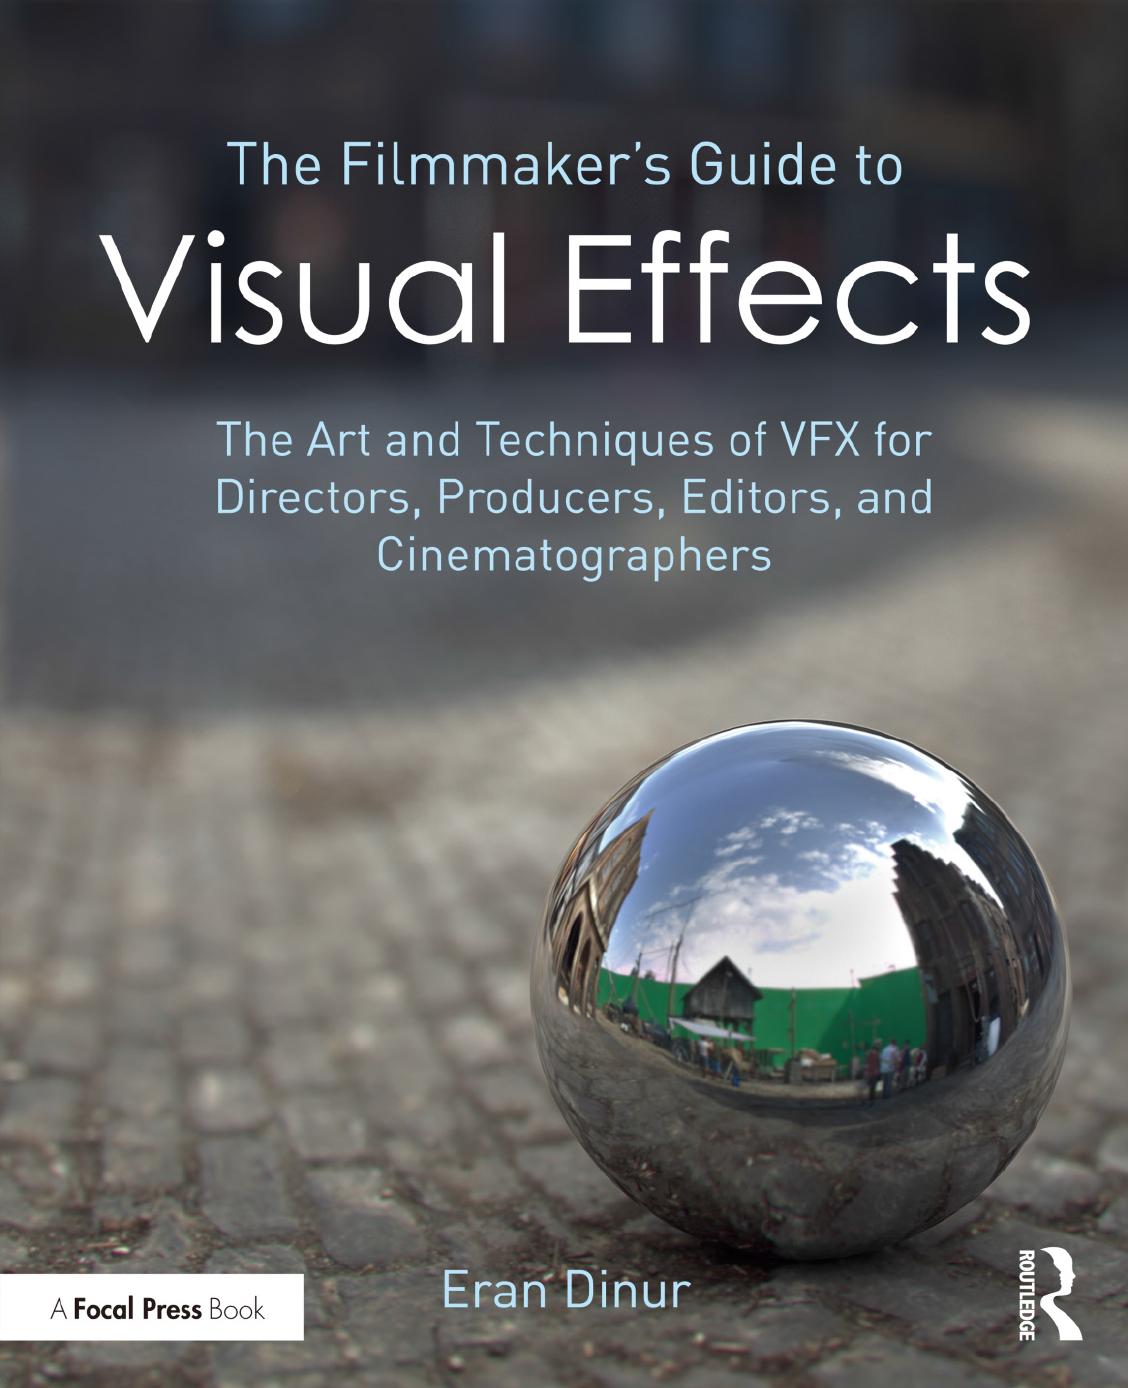 The Filmmaker’s Guide to Visual Effects The Art and Techniques of VFX for Directors, Producers, Editors and Cinematographers 2017